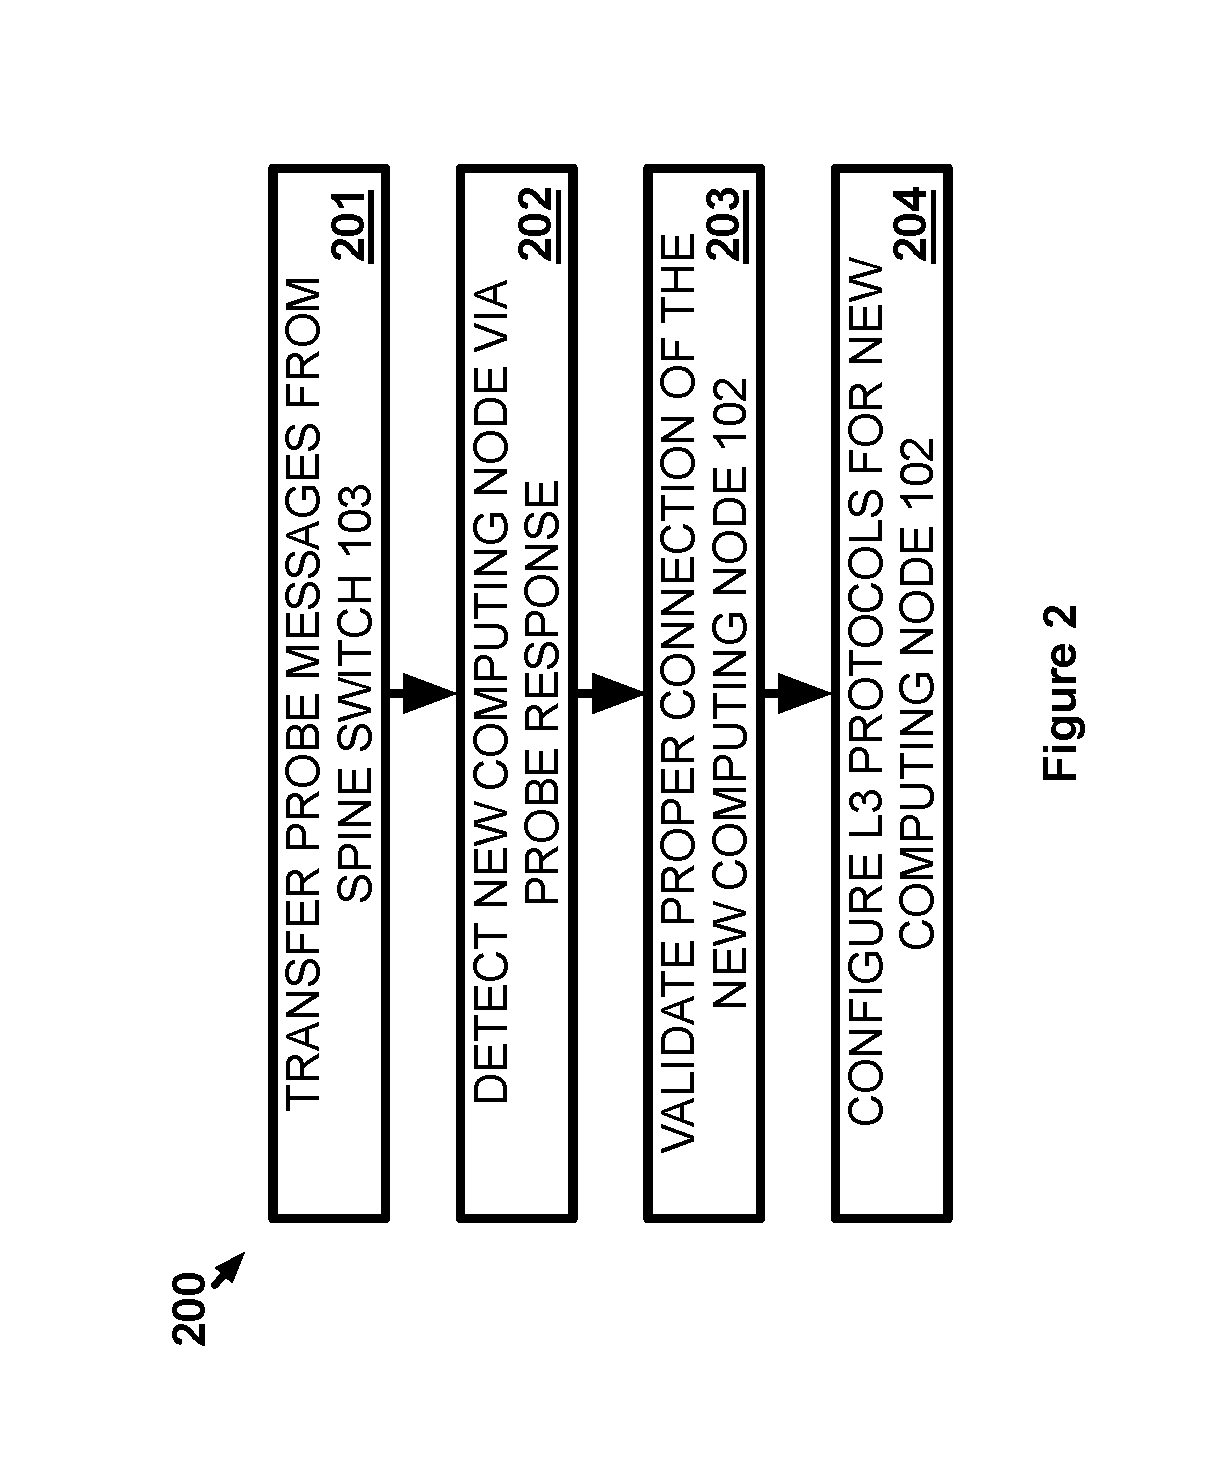 Self-expansion of a layer 3 network fabric